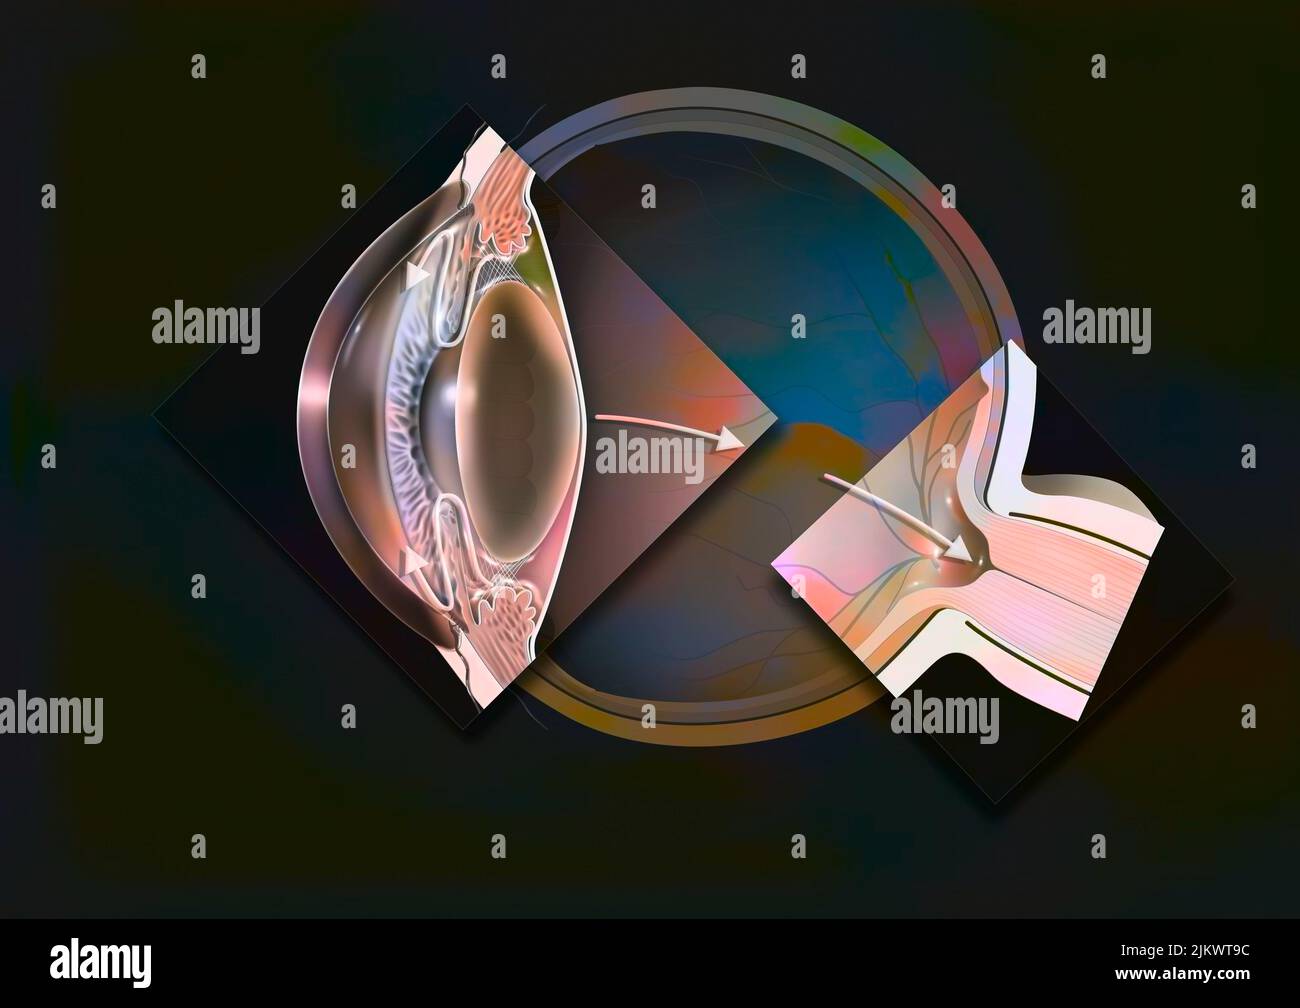 Glaucomatous eye with zooms of an open angle glaucoma and a glaucomatous papilla. Stock Photo